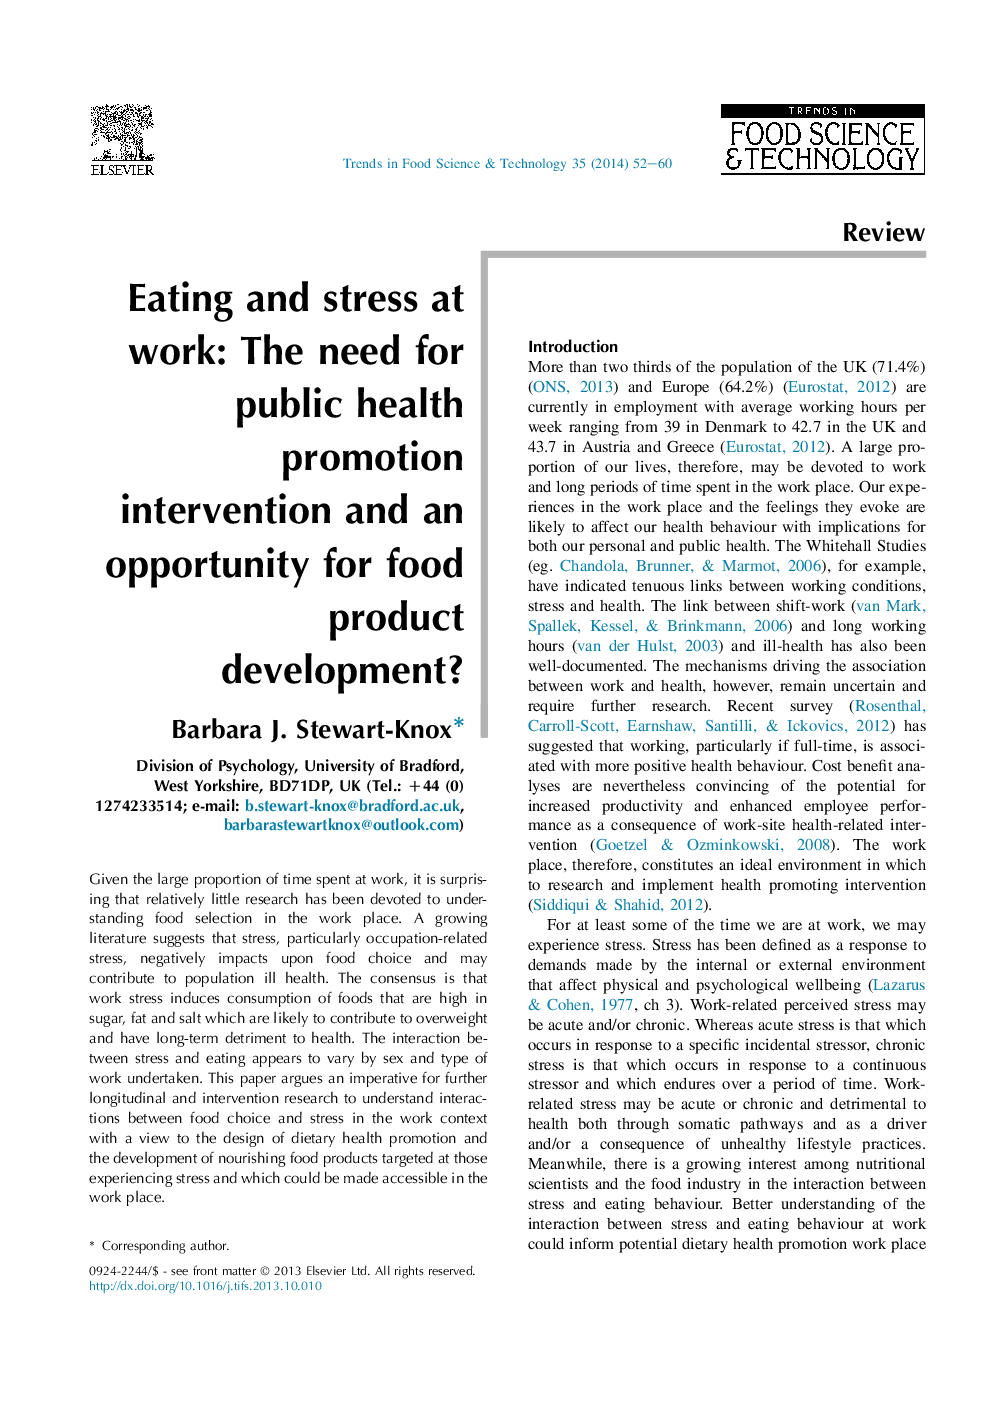 Eating and stress at work: The need for public health promotion intervention and an opportunity for food product development?